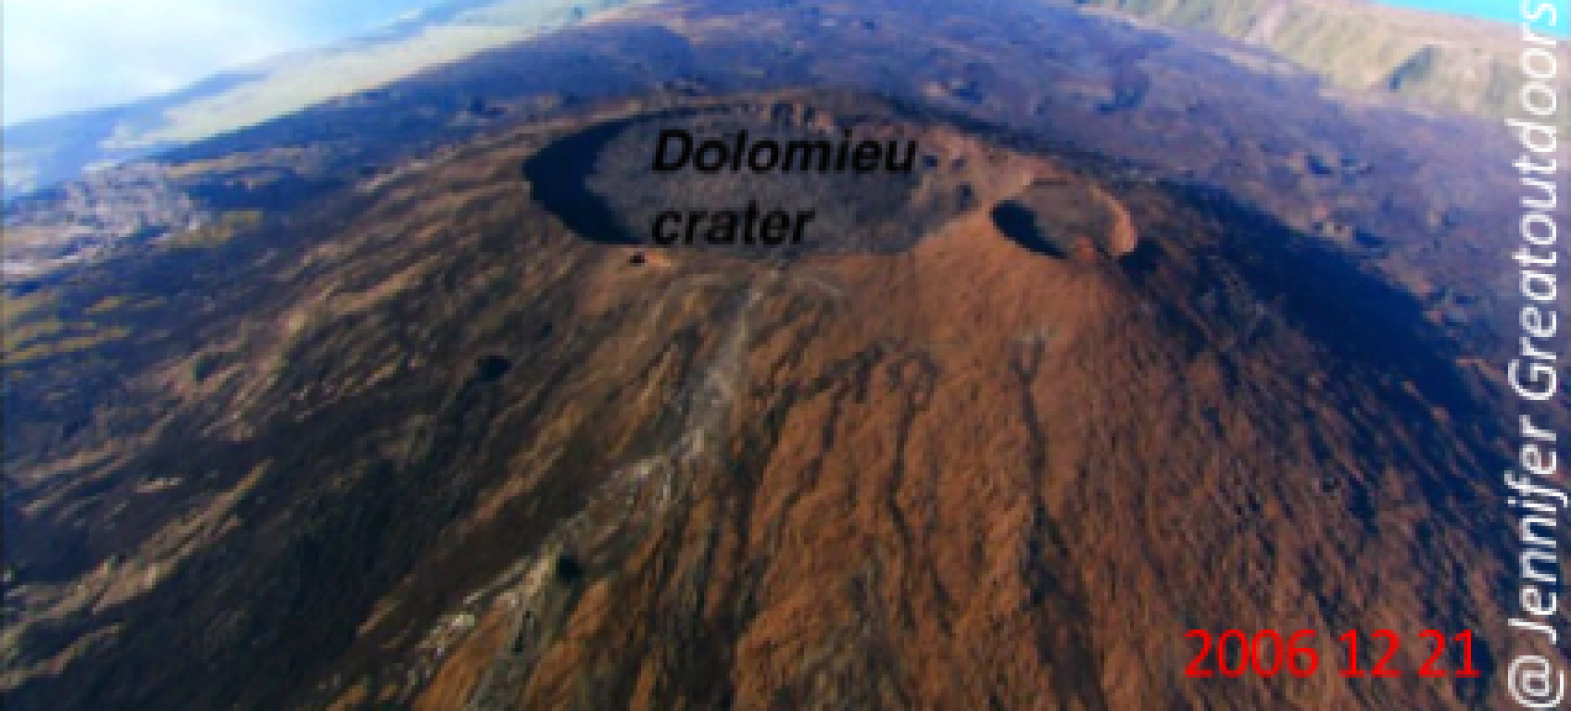 Very long-period and ultra-long-period seismic signals detected before and during the formation of the Dolomieu caldera on Reunion Island in 2007